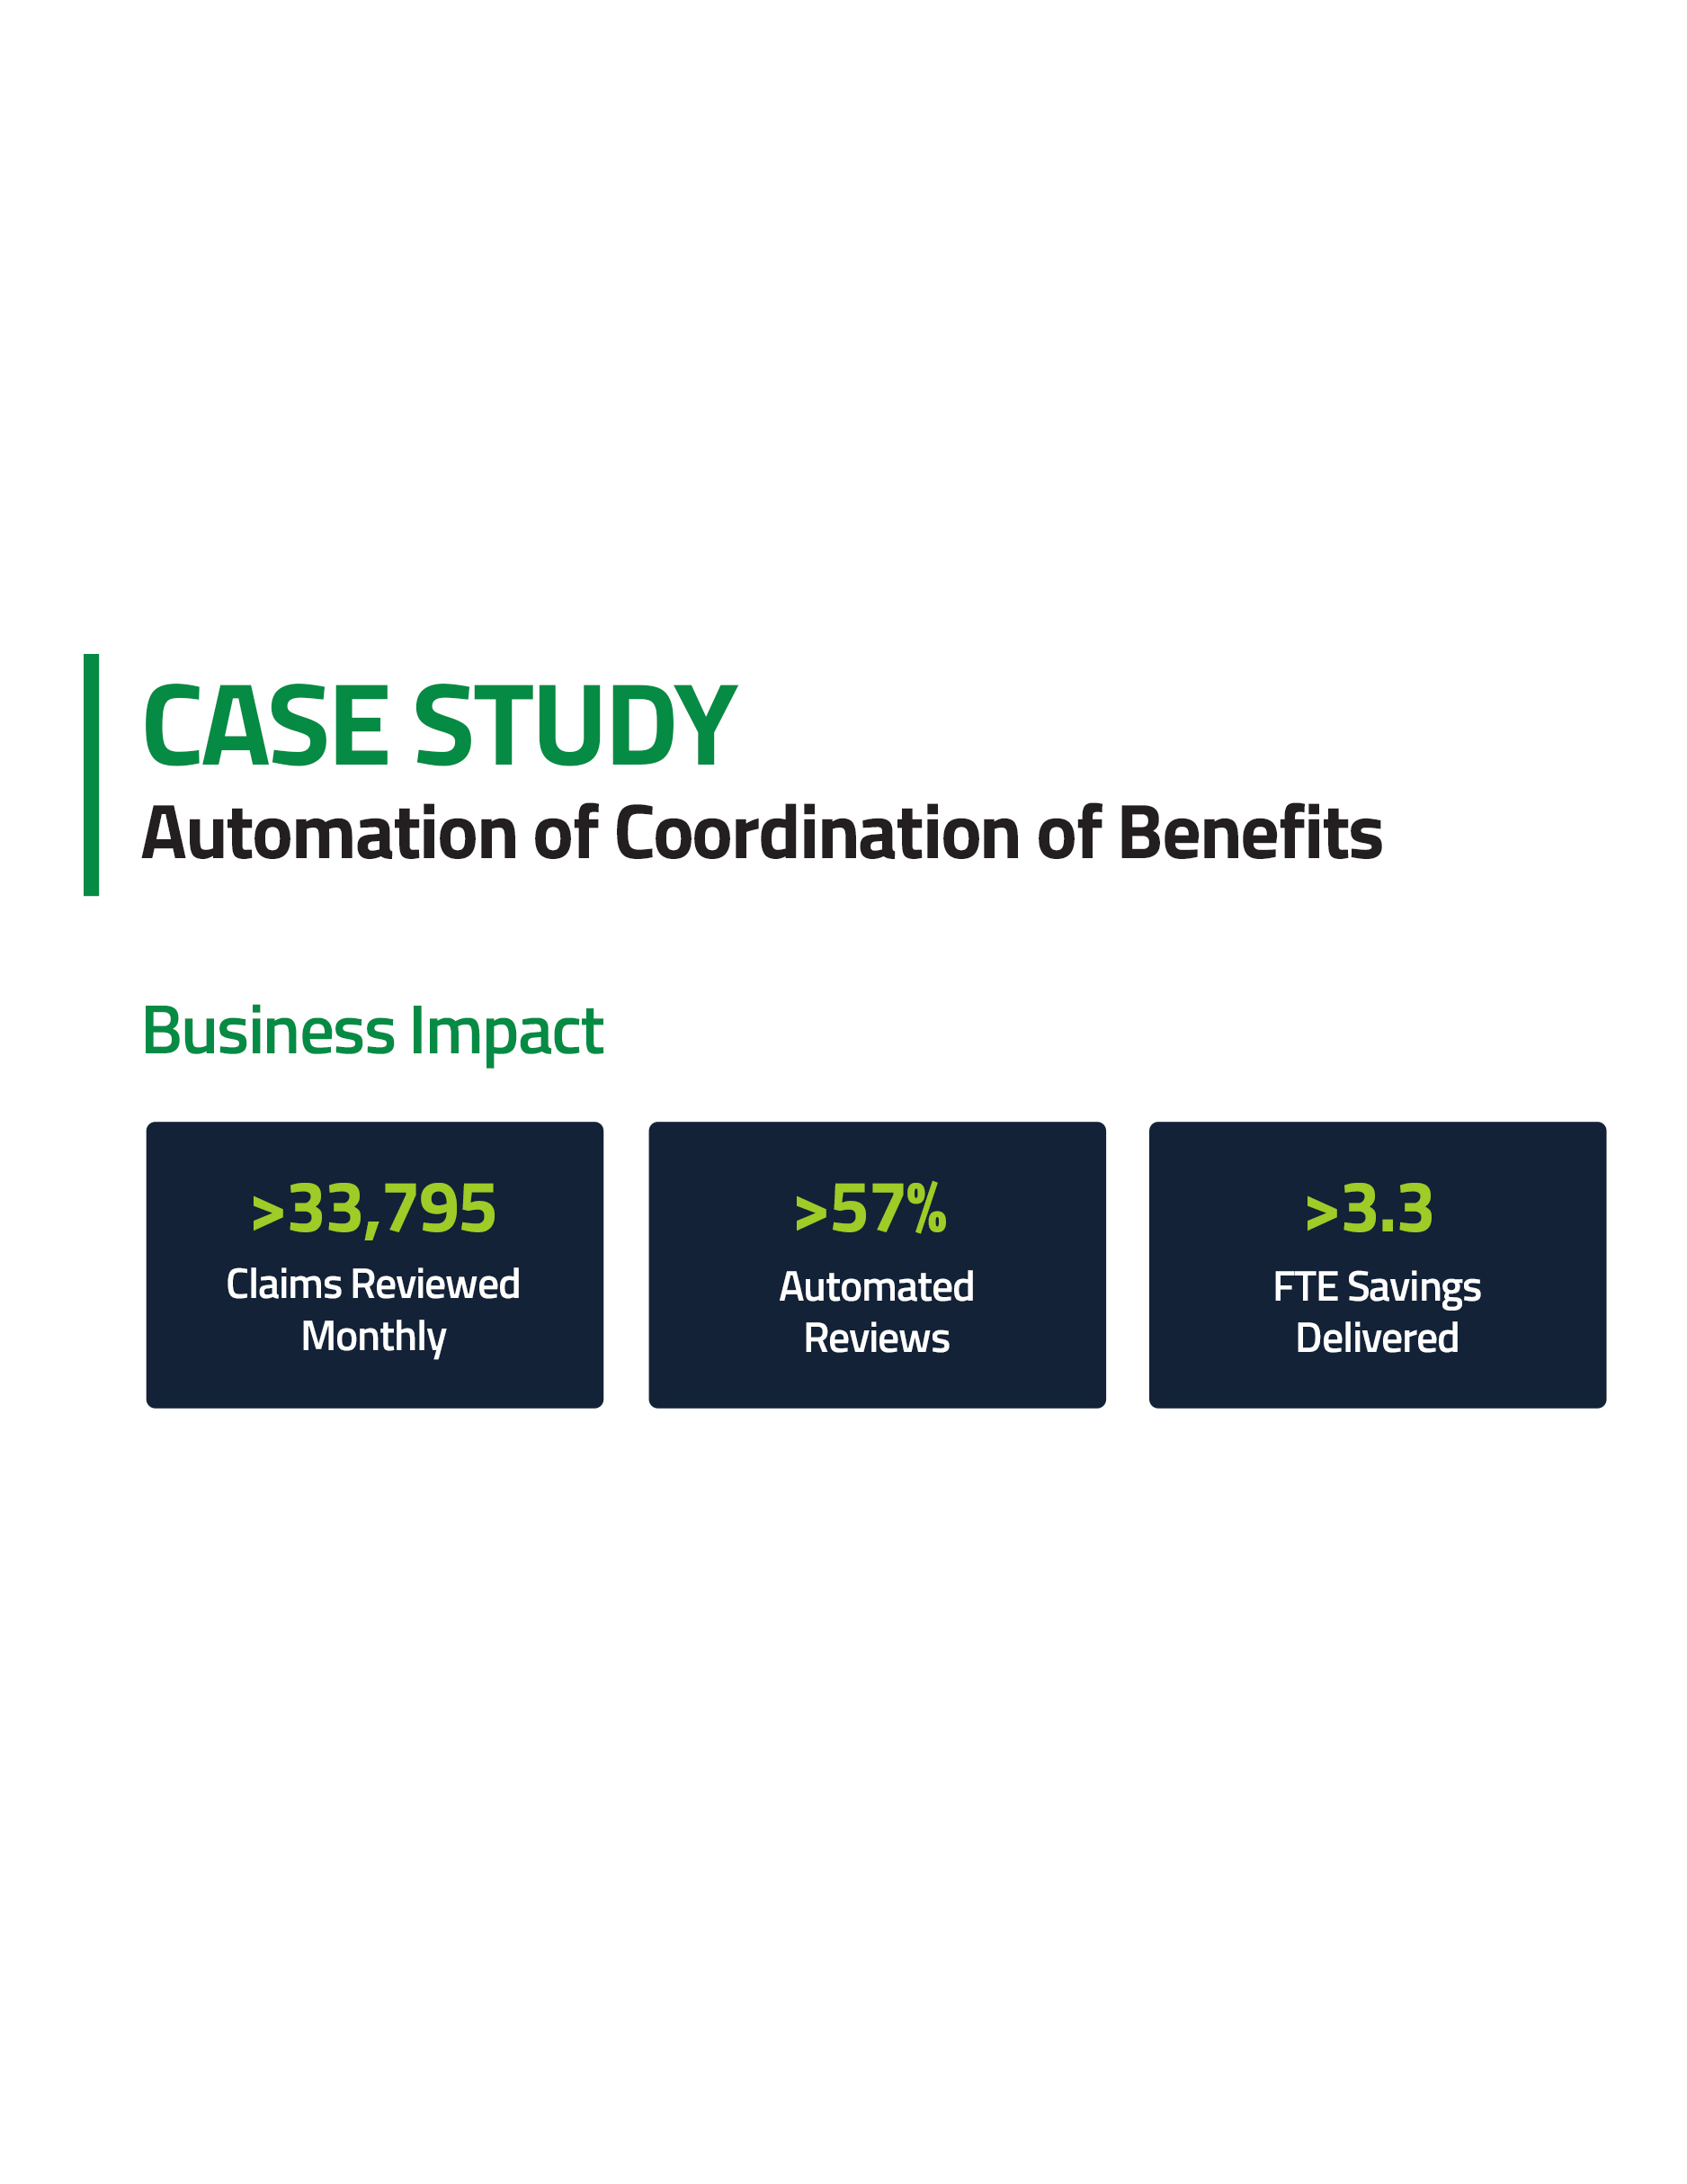 1643620652Automation of Coordination of Benefits-thumbnail.jpg